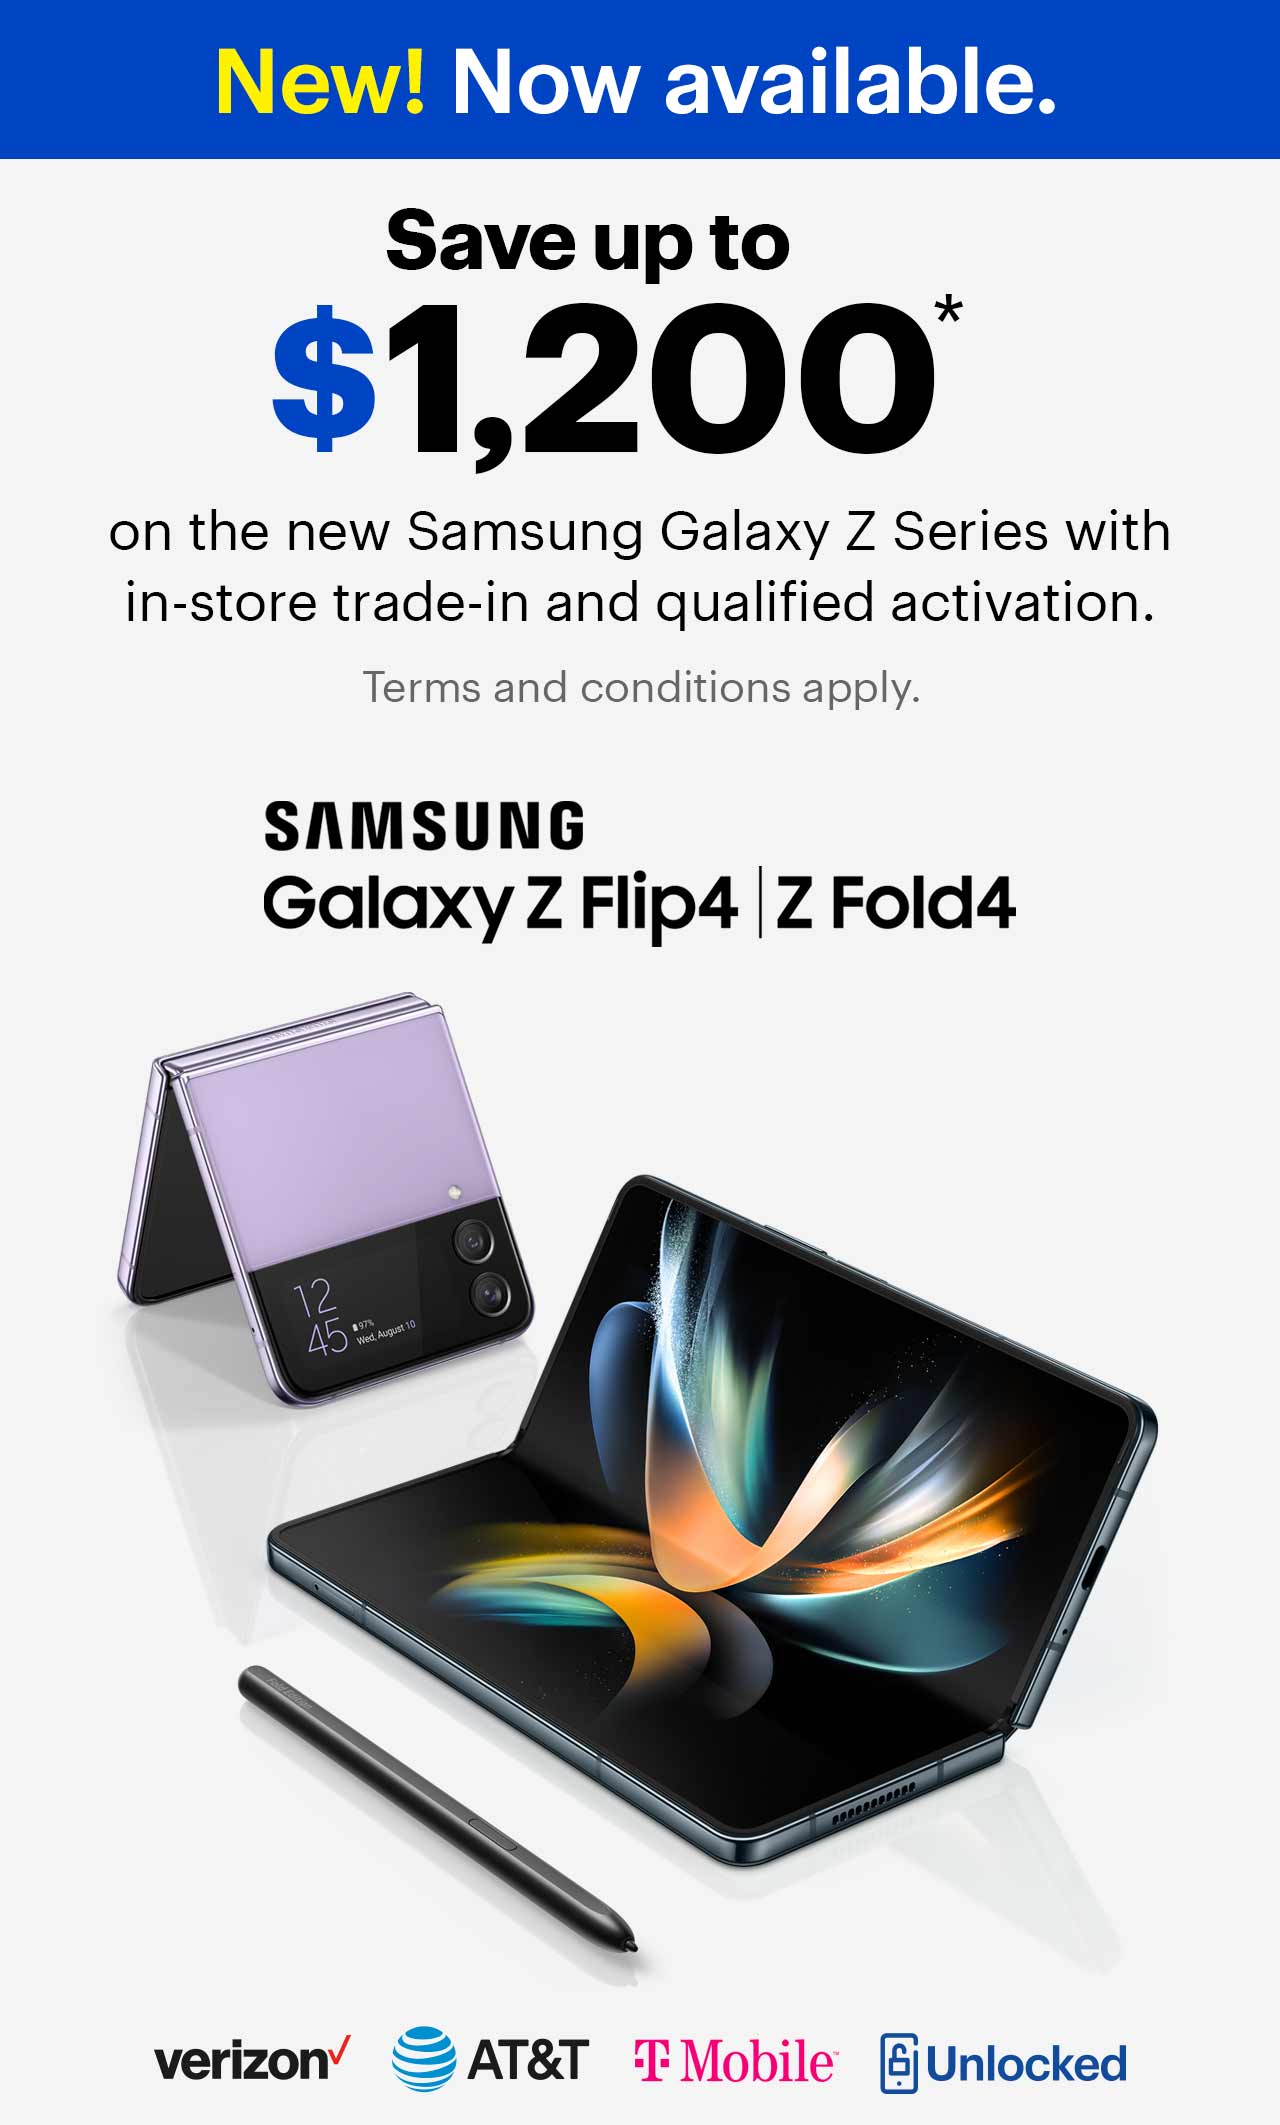 New! Now available, save up to $1,200 on the new Samsung Galaxy Z Series with in-store trade-in and qualified activation. Cell phones, Samsung, Verizon, A T and T, Sprint, unlocked, samsung galaxy Z Fold 4, samsung galaxy Z Flip 4